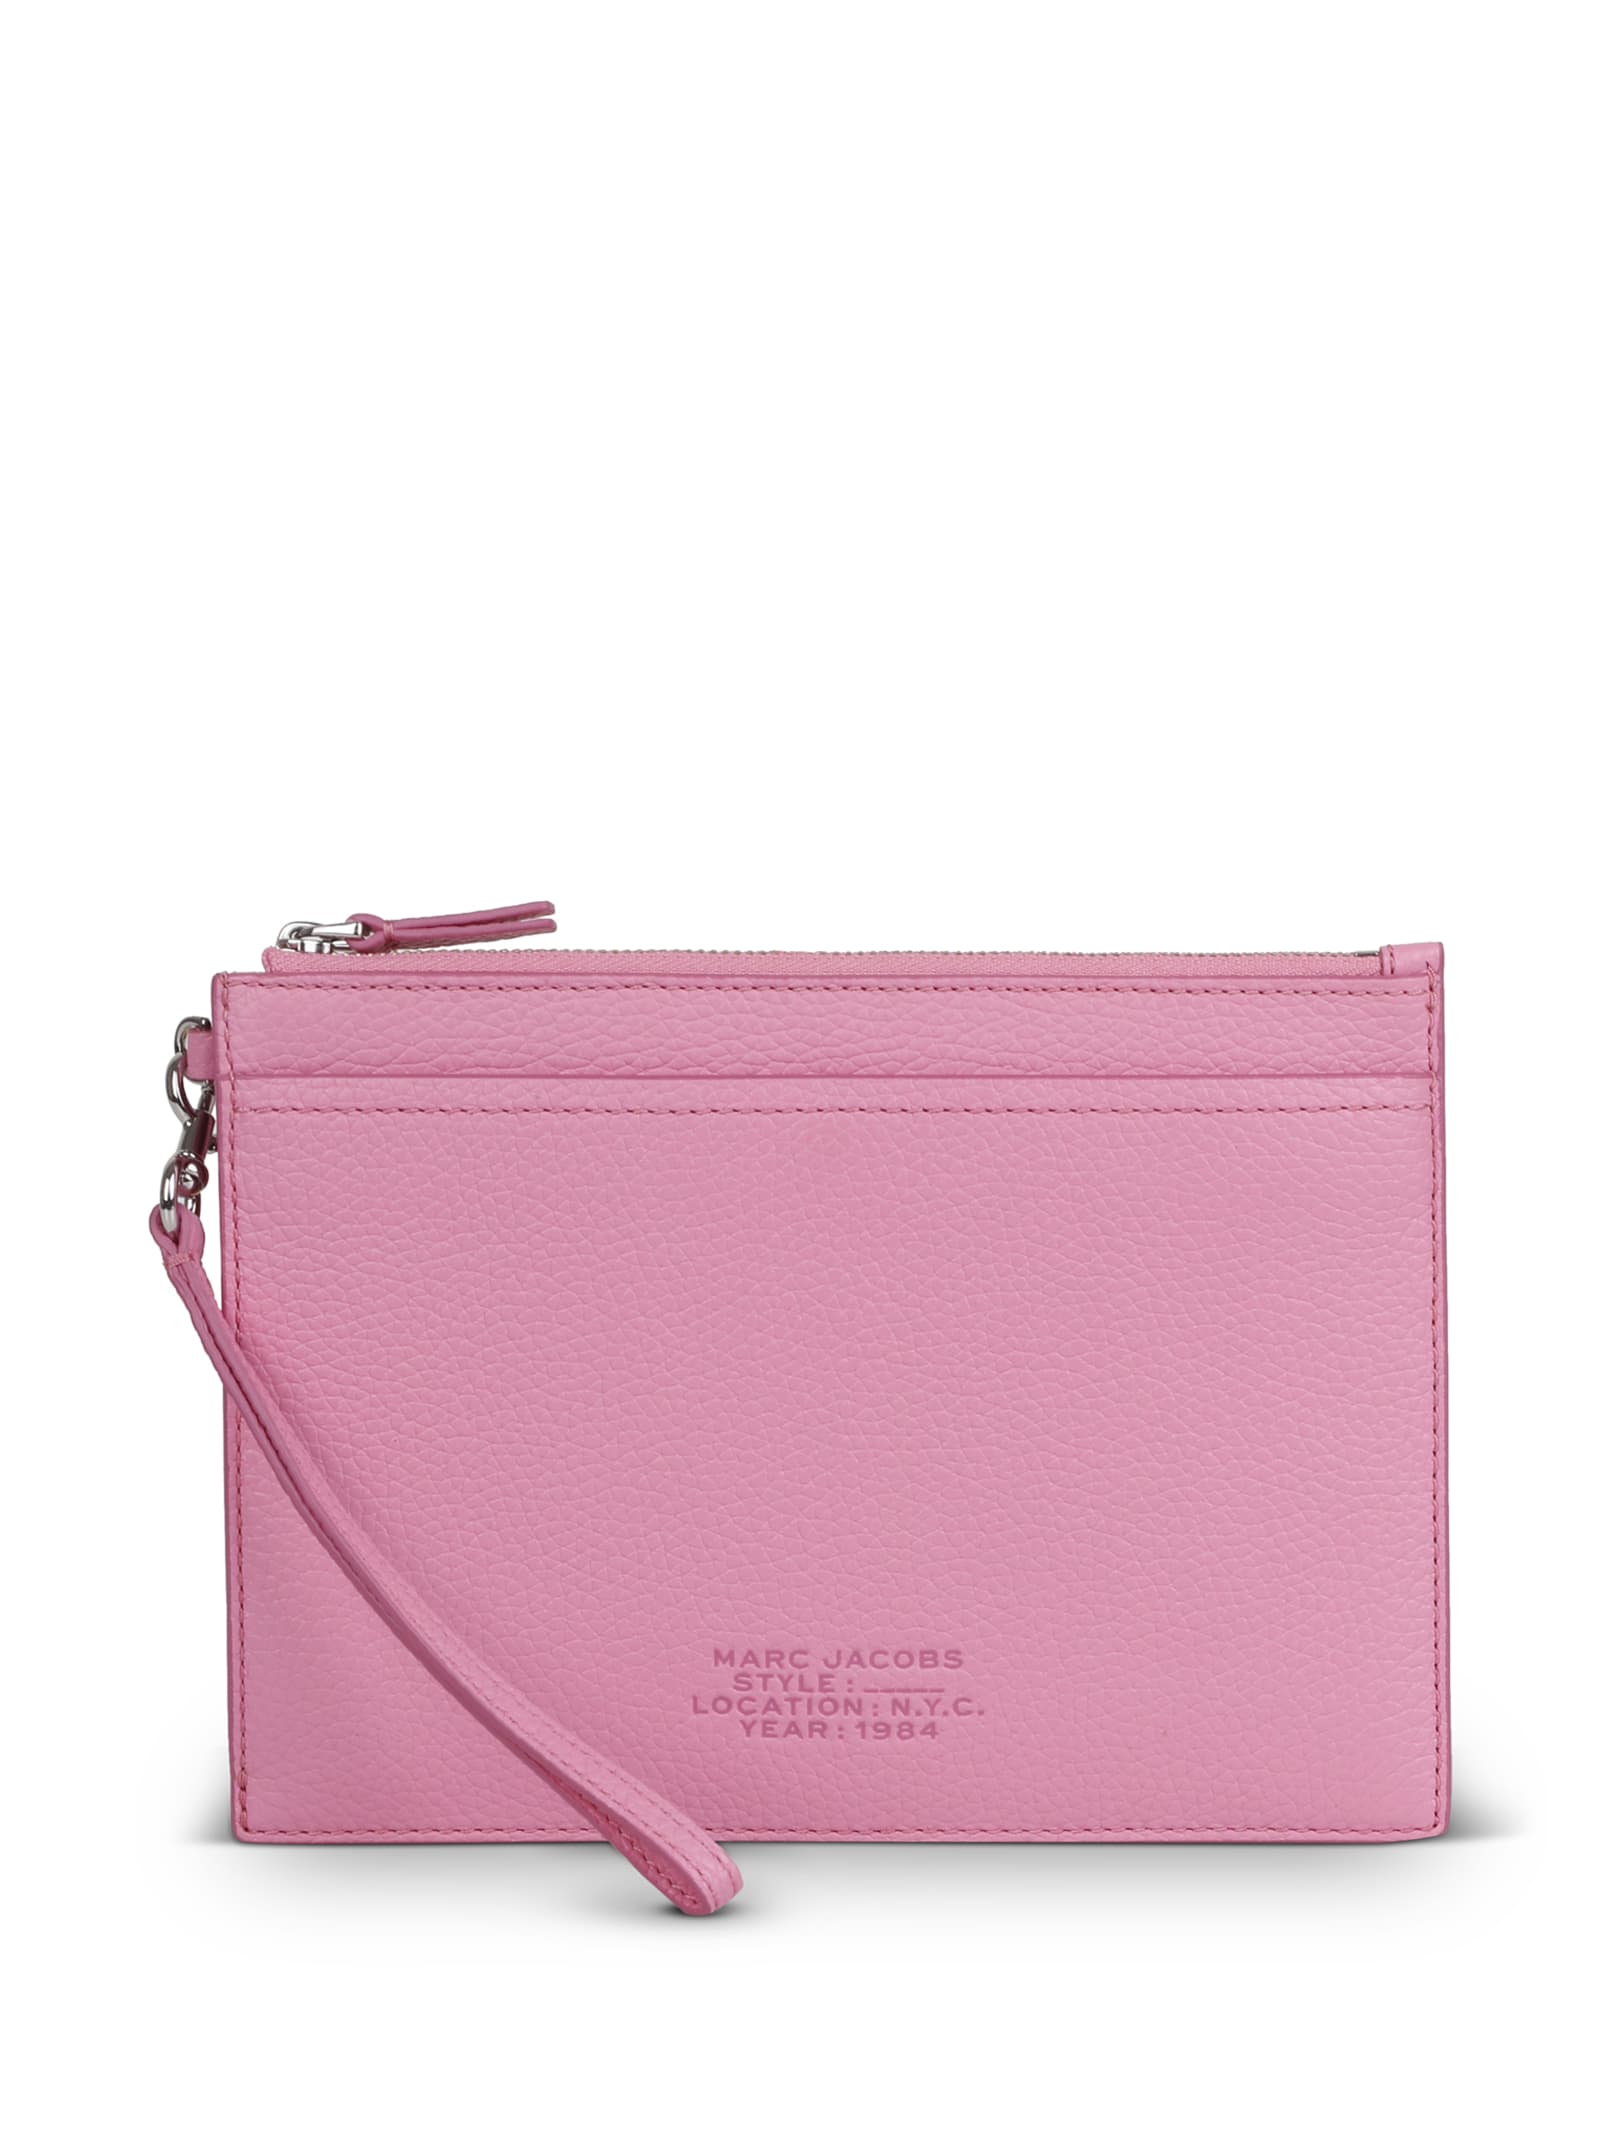 MARC JACOBS MARC JACOBS LEATHER WRISTLET WALLET WITH LOGO